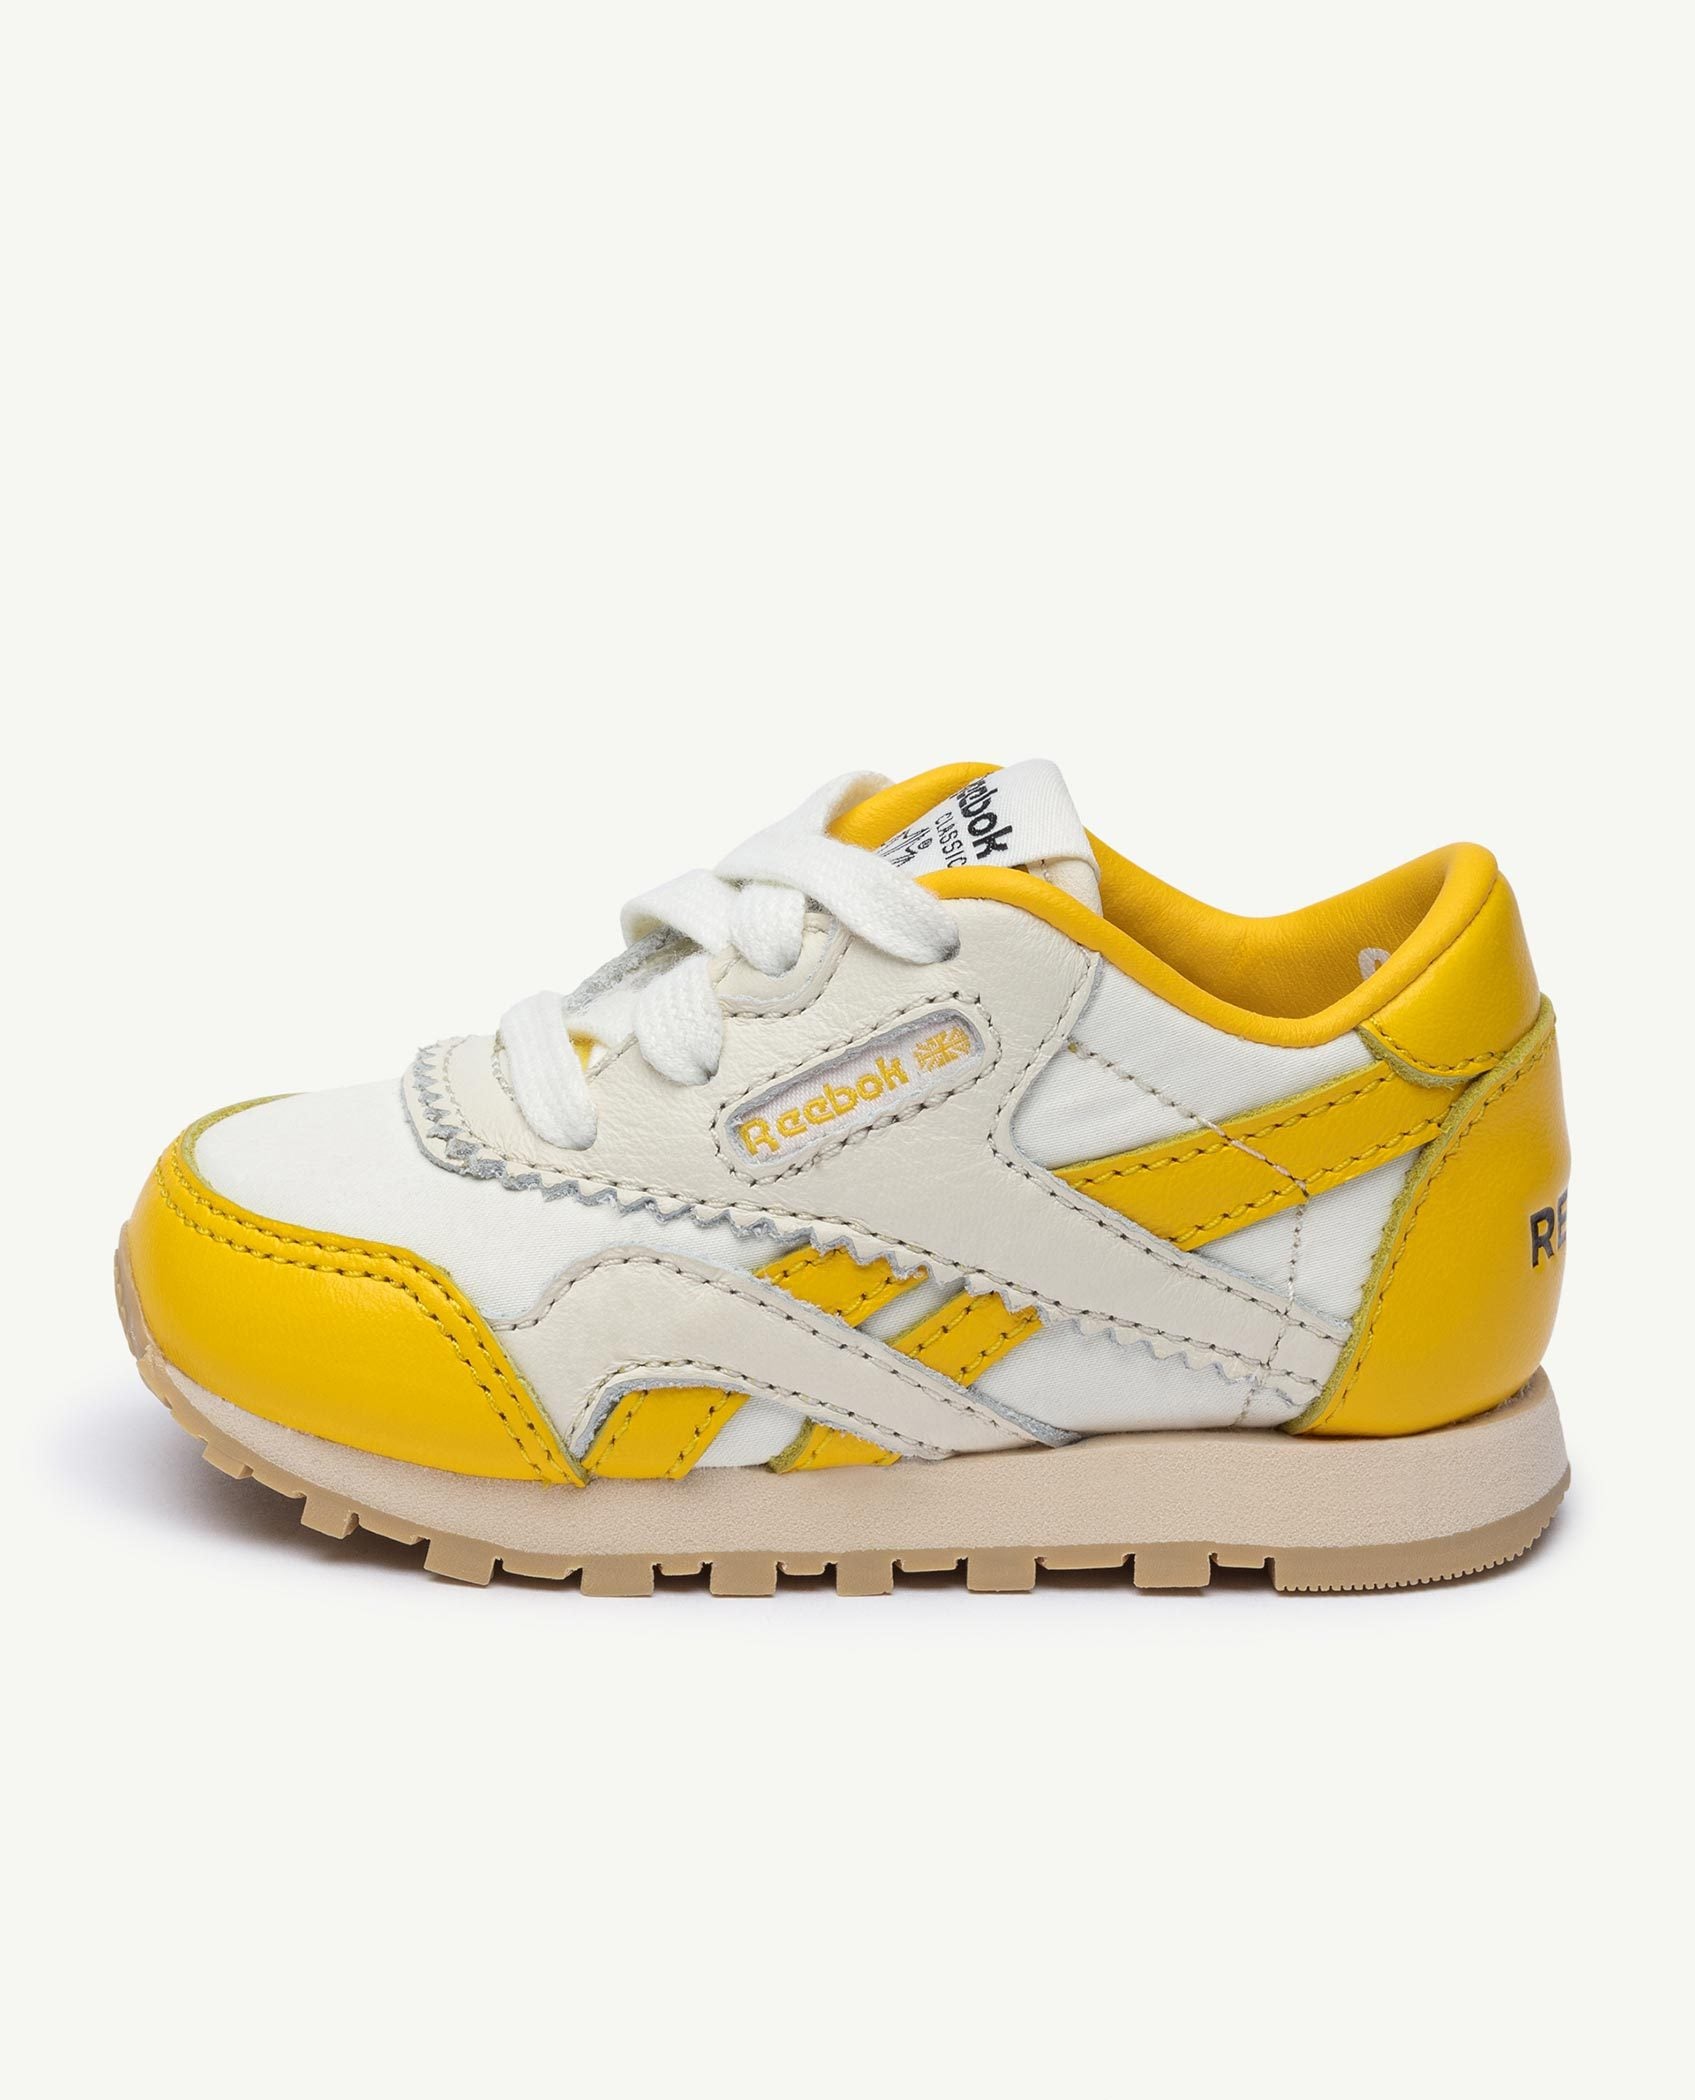 Reebok x The Animals Observatory Classic Nylon Yellow Baby PRODUCT FRONT